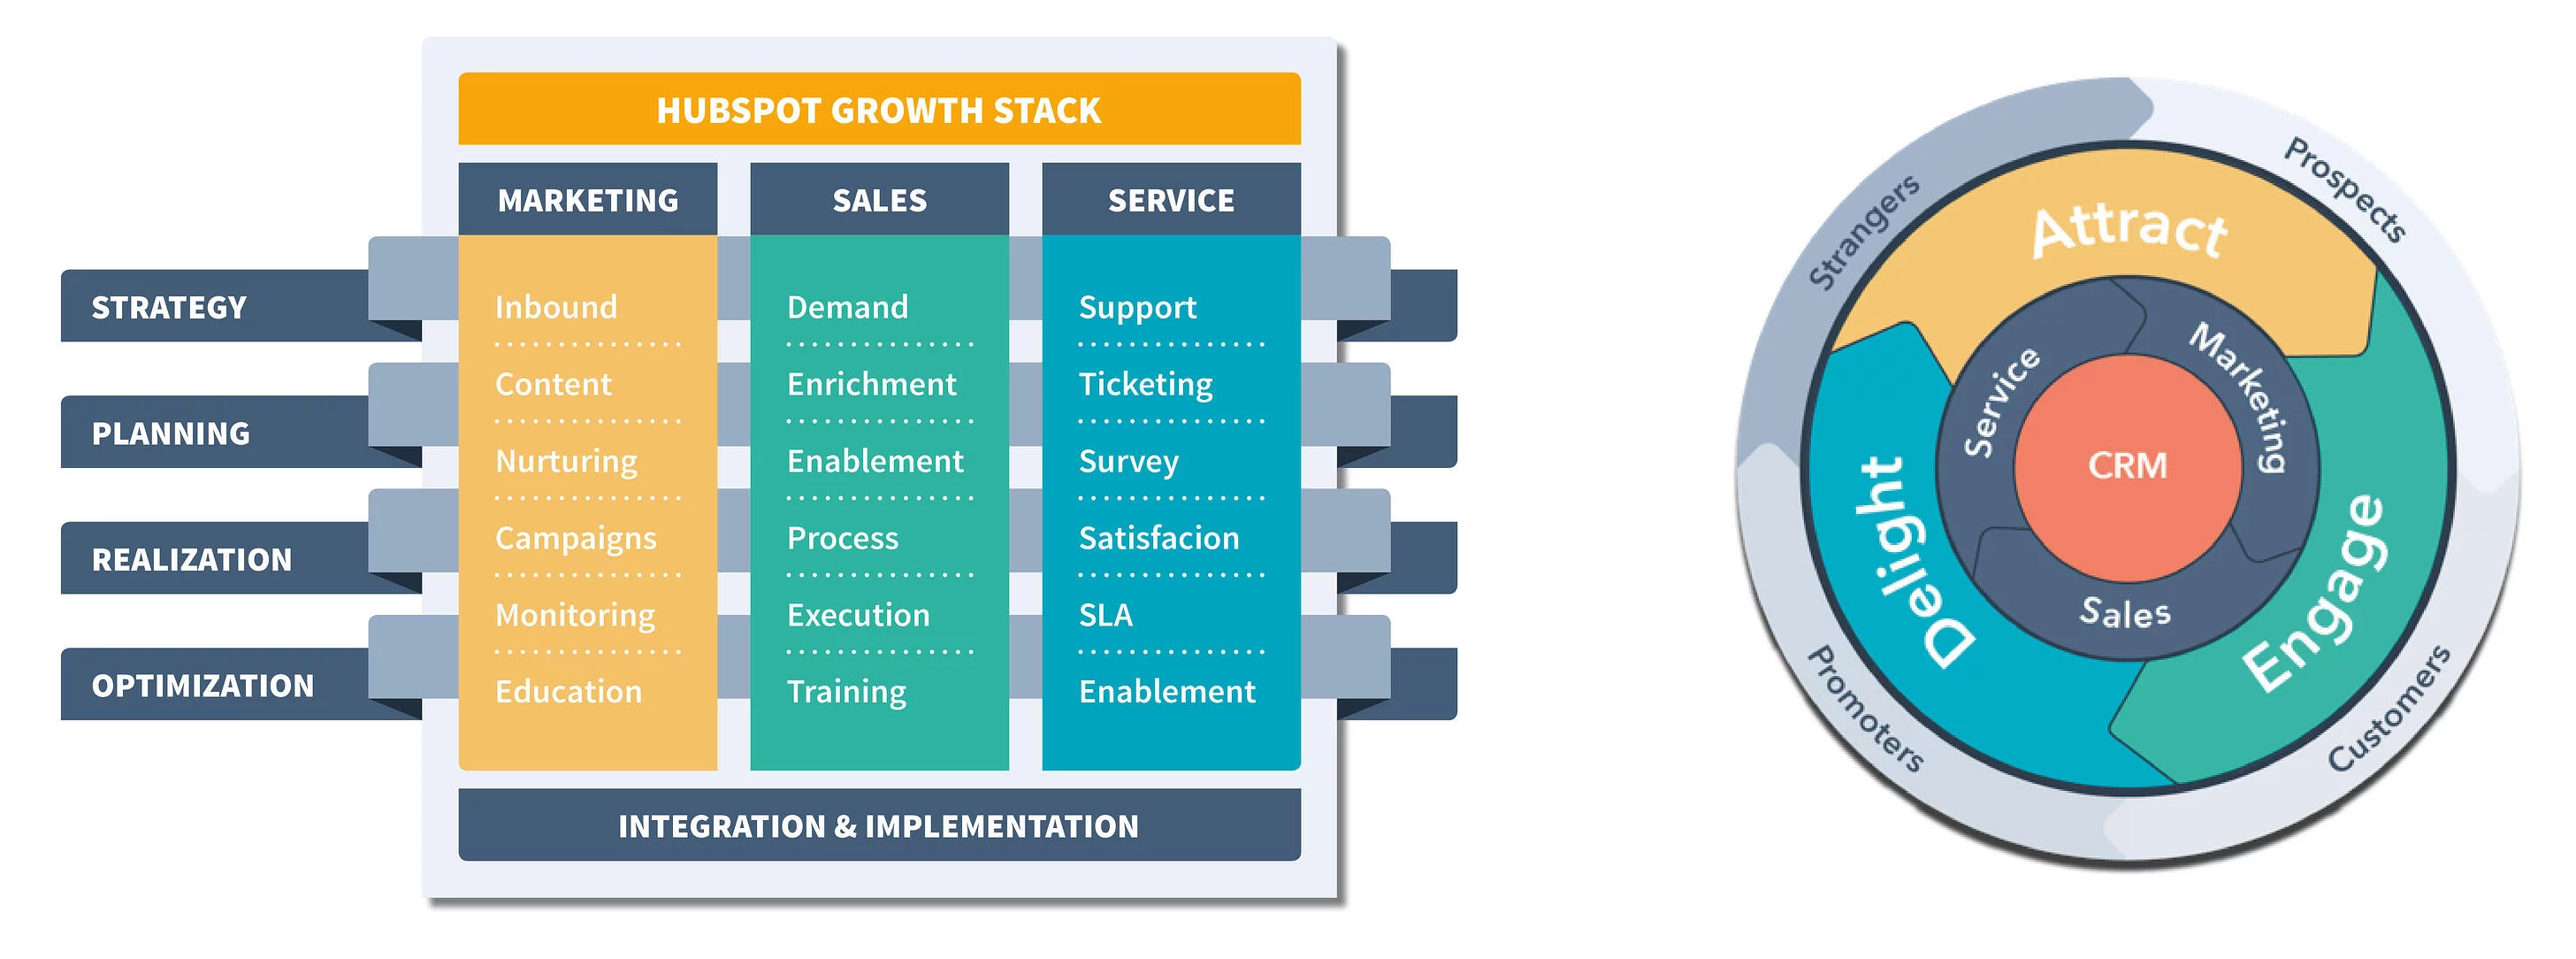 hubspot growth stack